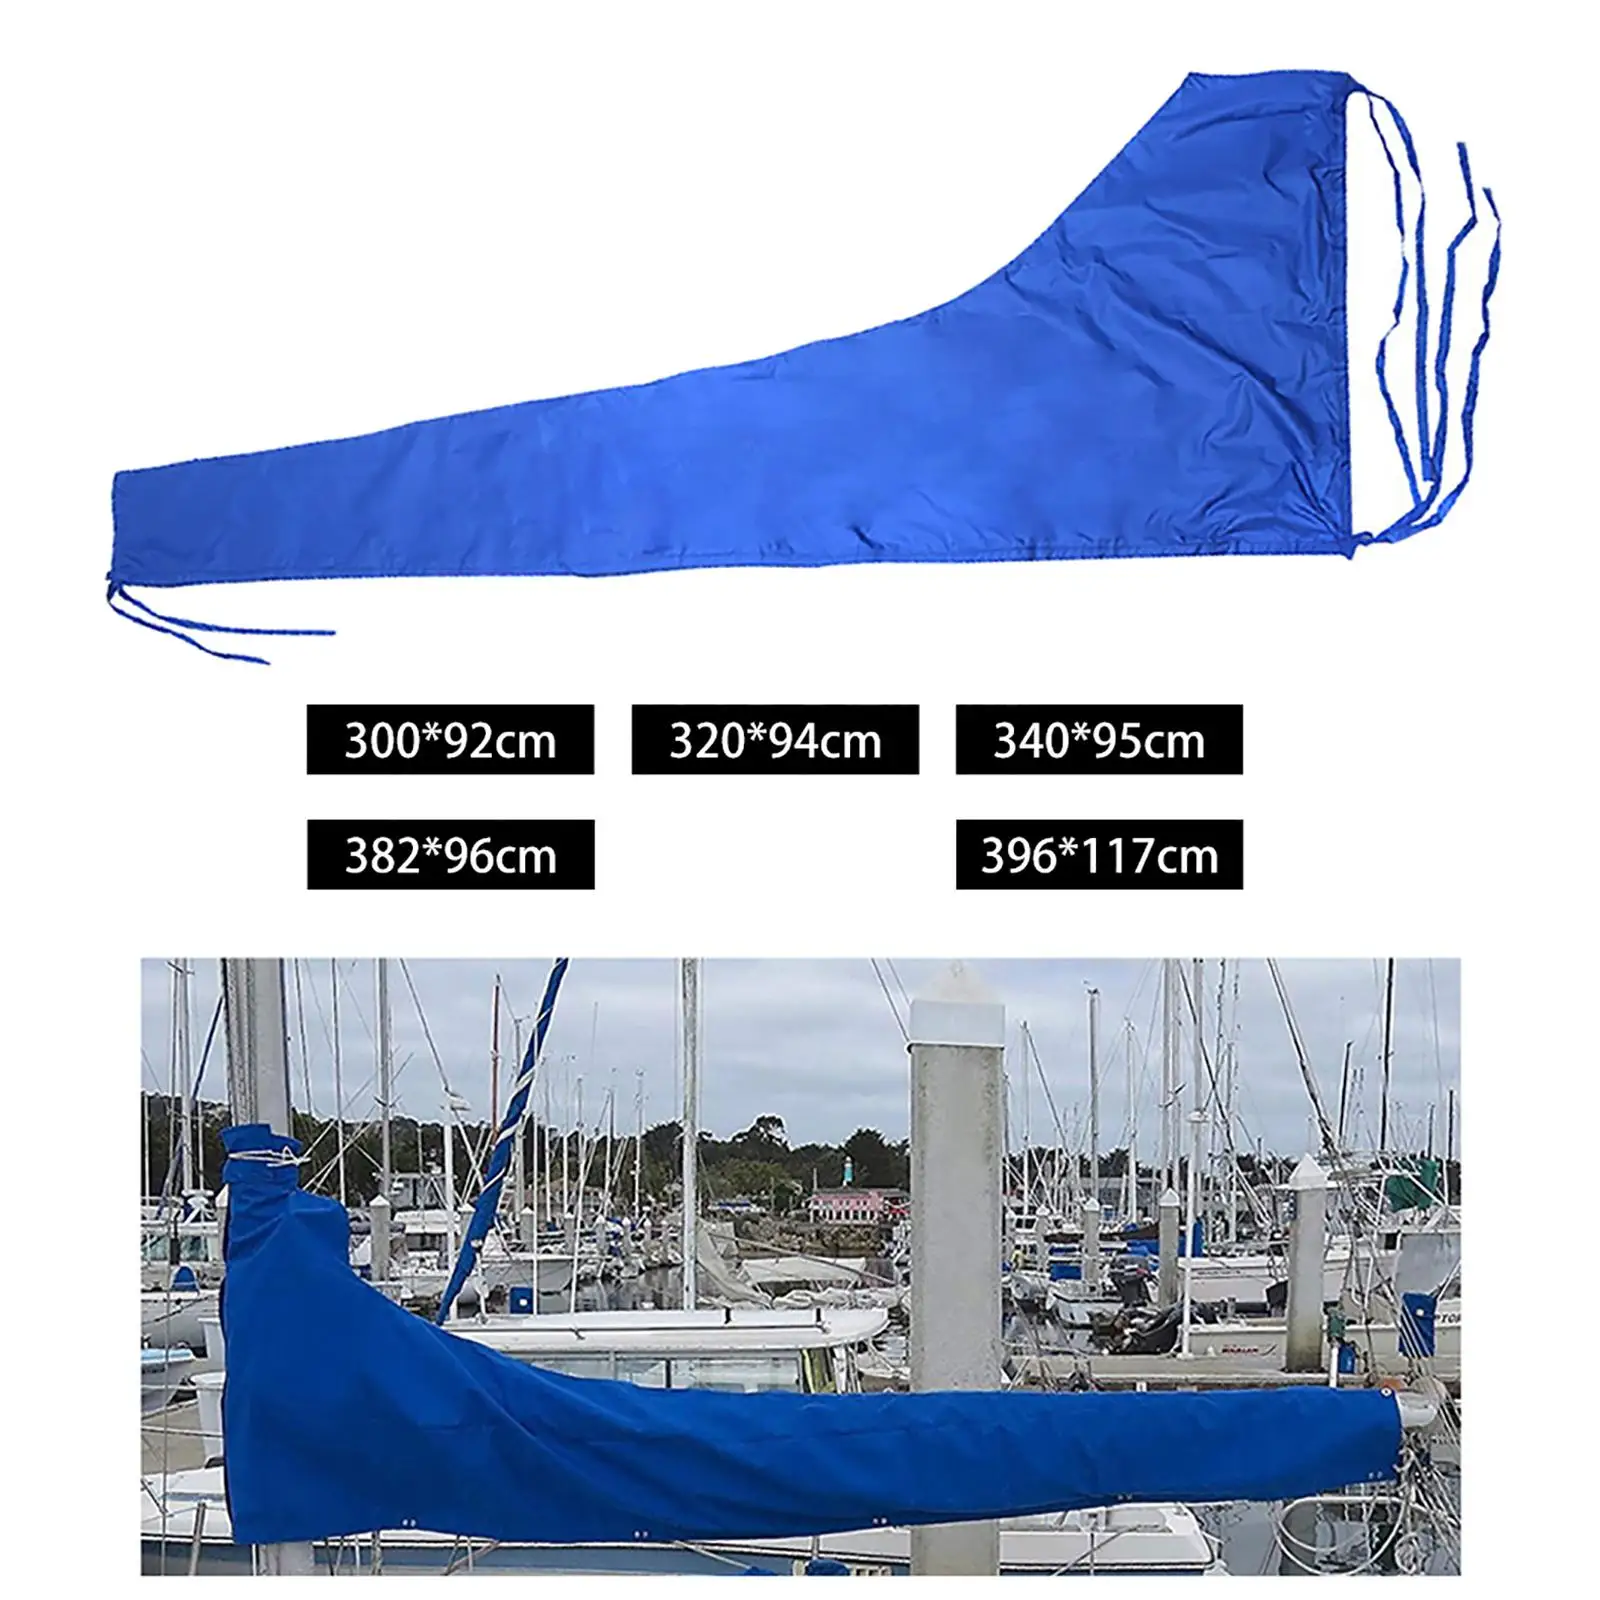 Mainsail Boom Cover Seamless Protection Boat Accessories Boat Cover Blue